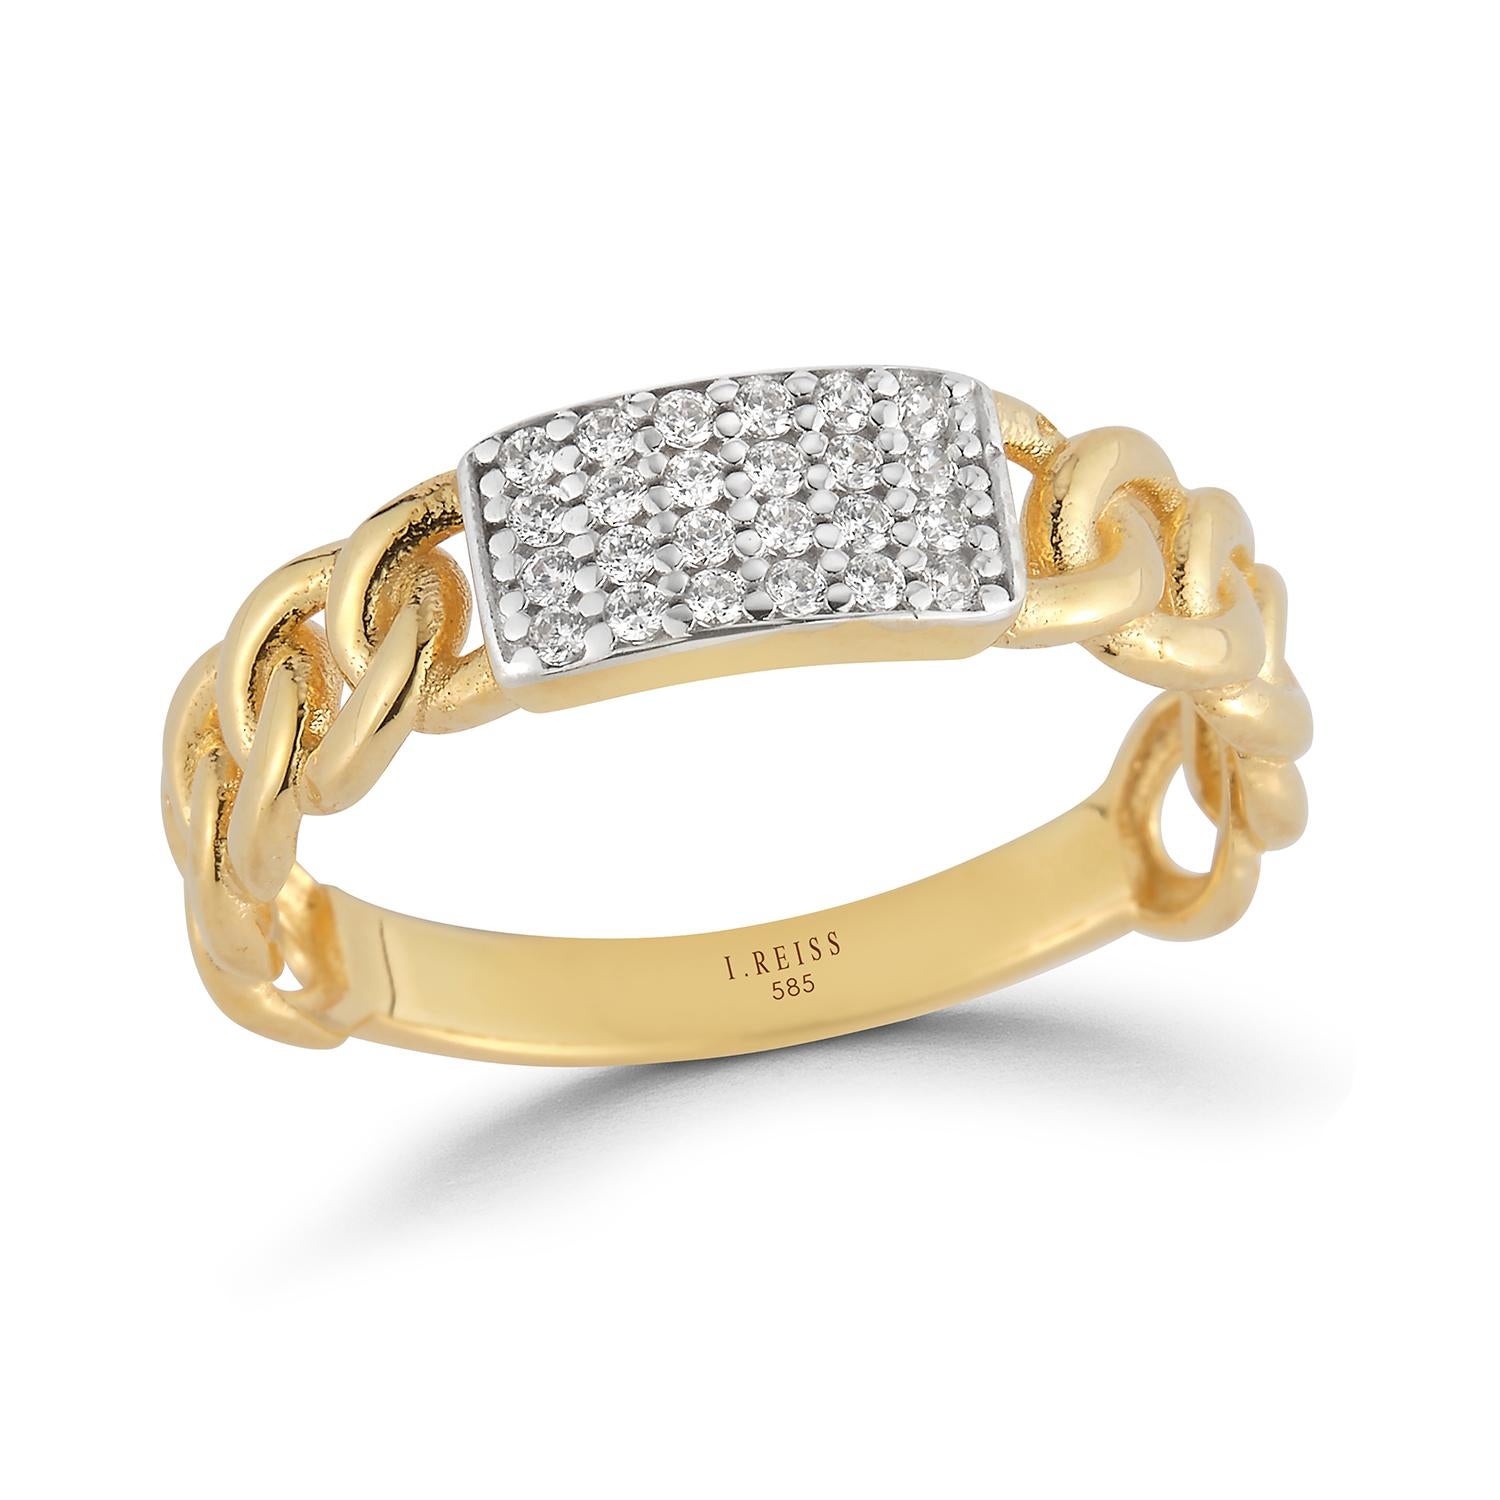 For Sale:  Handcrafted 14k Yellow Gold 0.14cttw Braided ID Ring 4